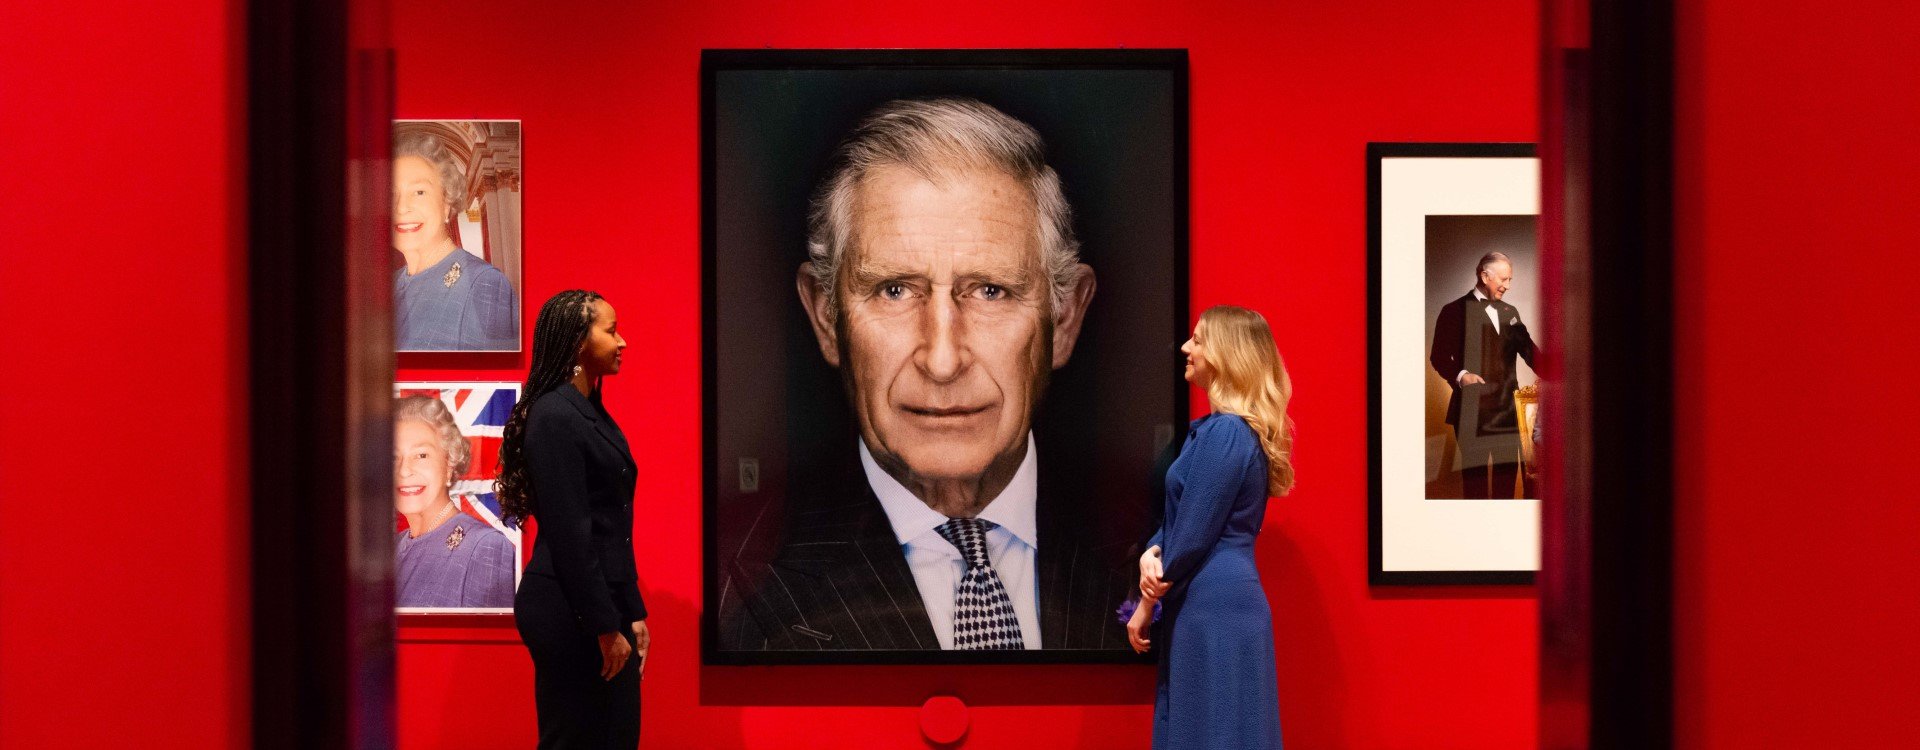 Portrait of King Charles III, when The Prince of Wales, by Nadav Kander, as part of the exhibition 'Royal Portraits: A Century of Photography'